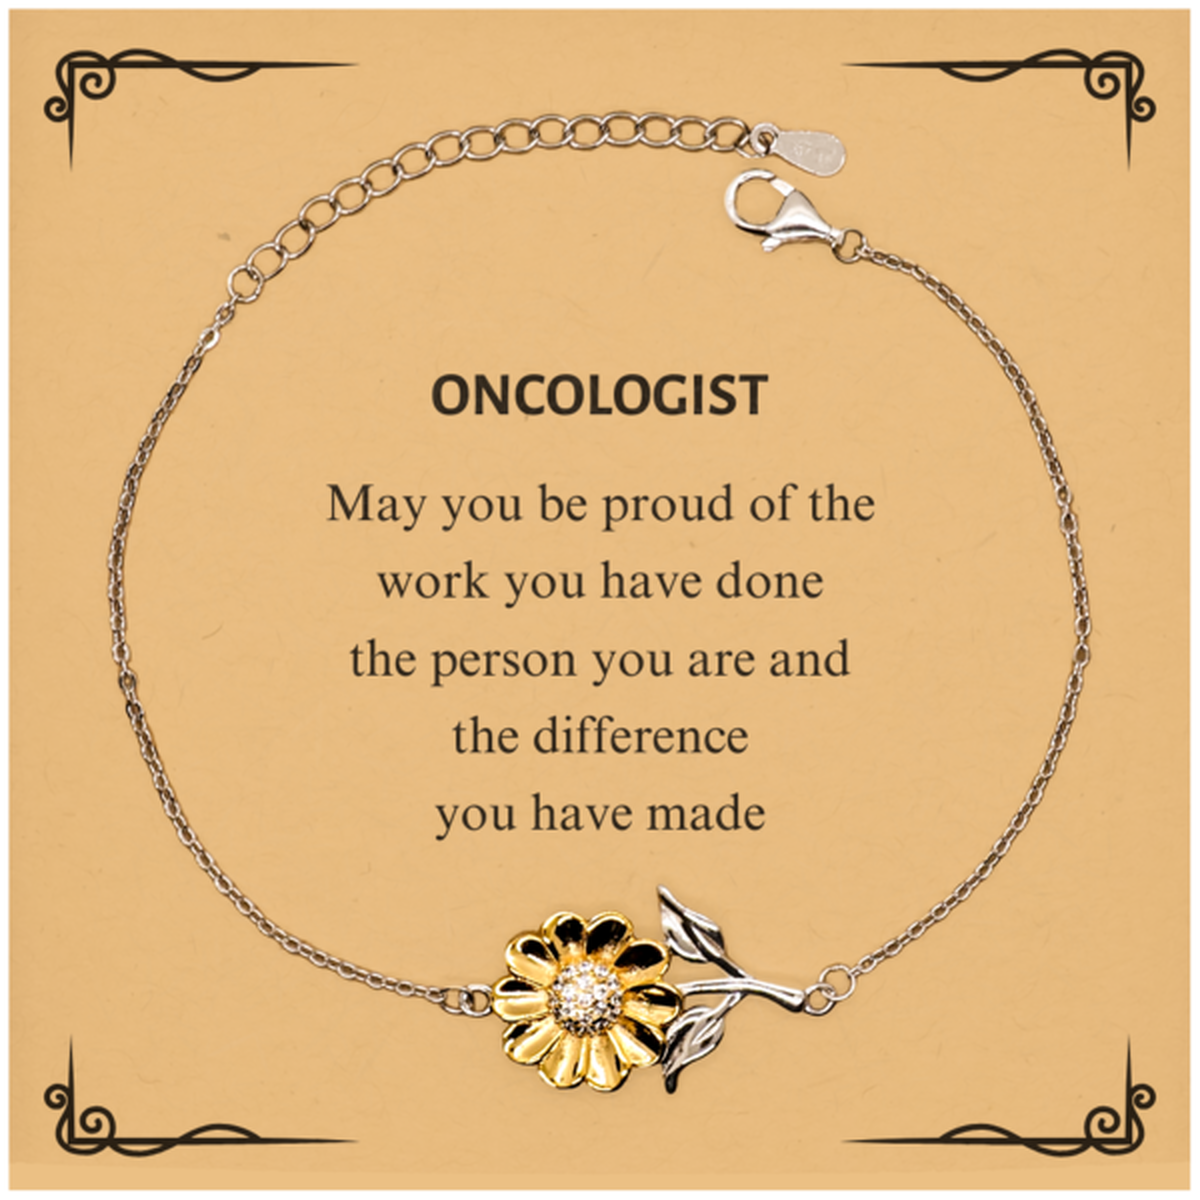 Oncologist May you be proud of the work you have done, Retirement Oncologist Sunflower Bracelet for Colleague Appreciation Gifts Amazing for Oncologist